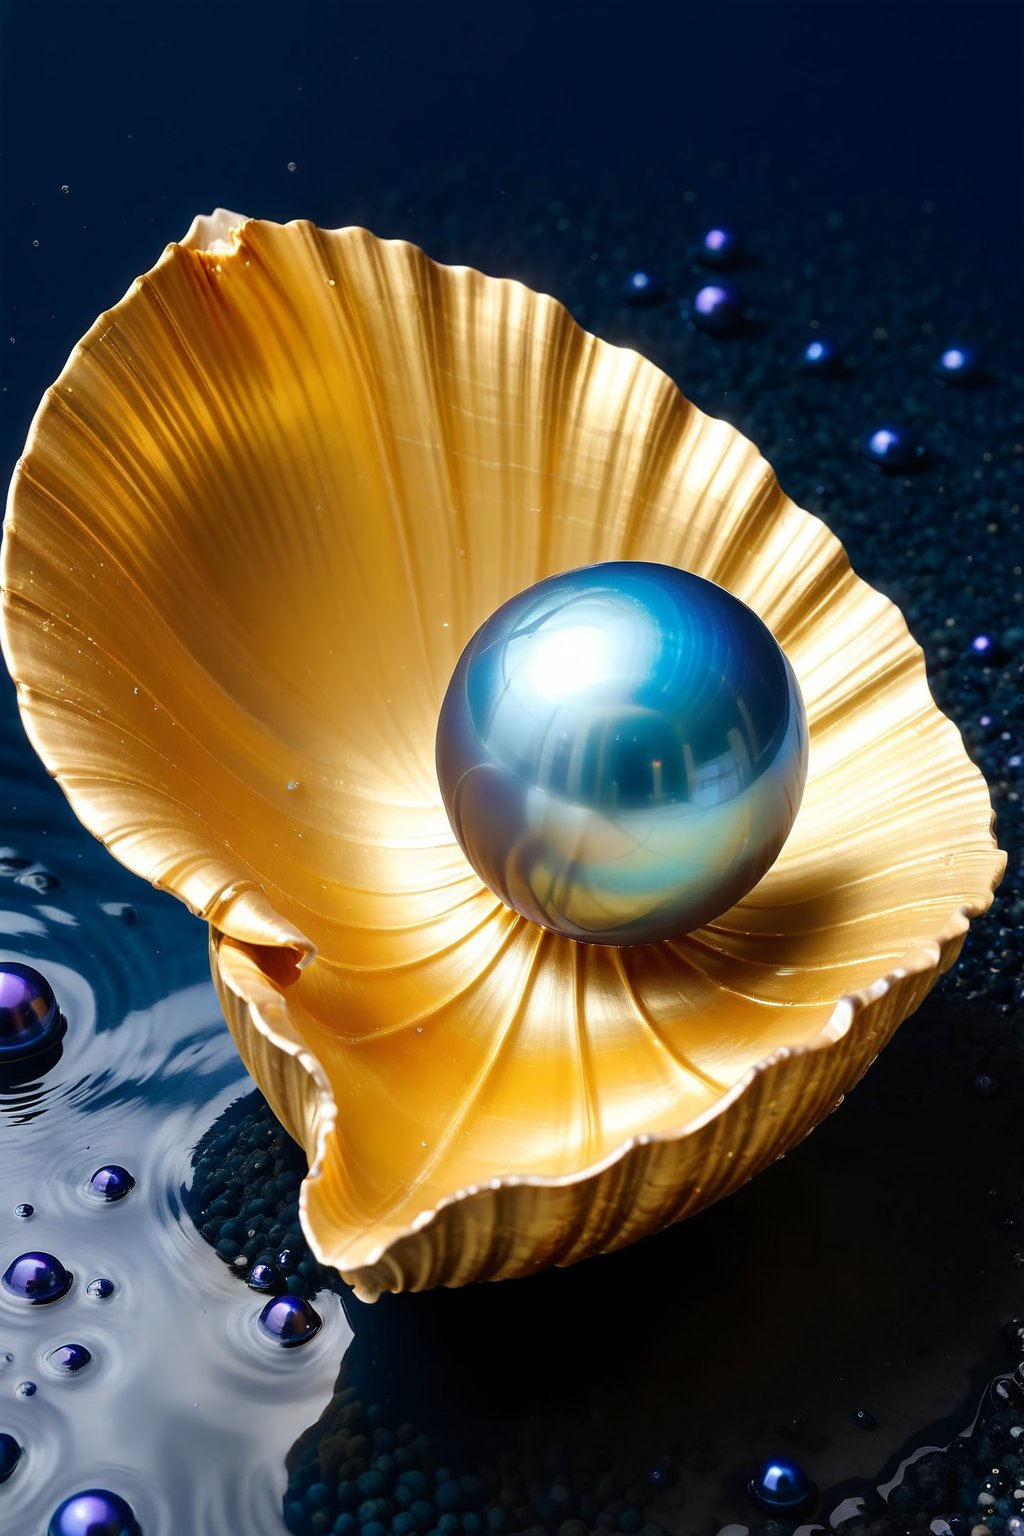 An open golden shell containing a blue pearl in the deep sea